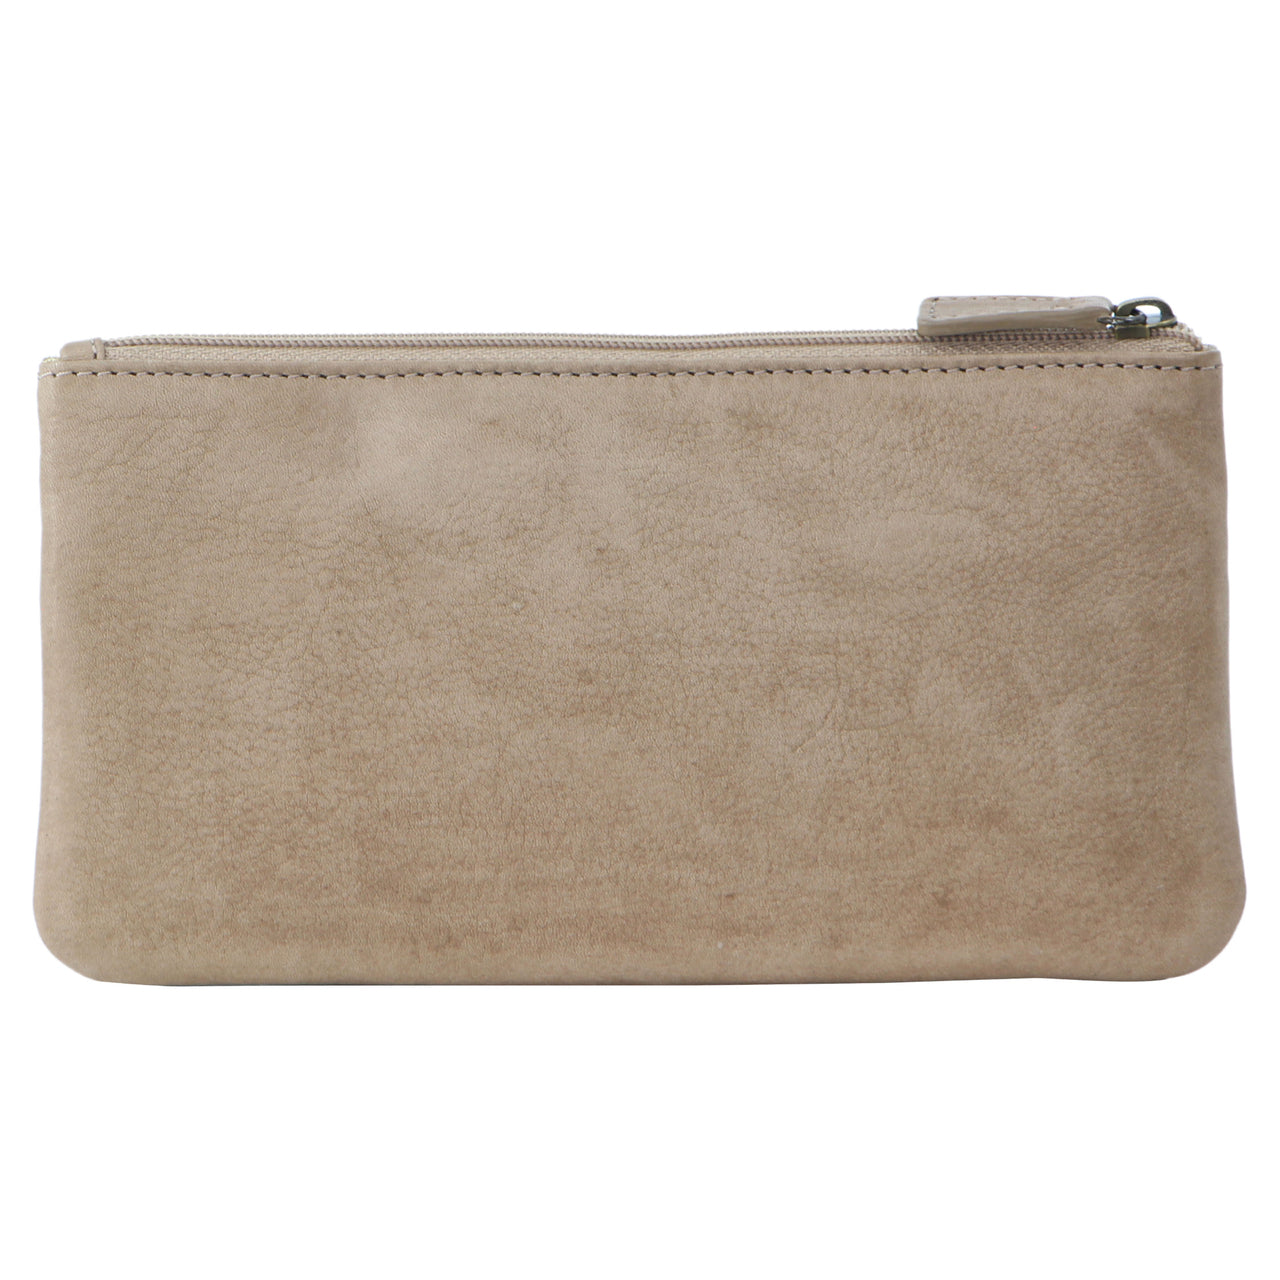 Pierre Cardin Ladies Womens Genuine Soft Leather Italian Wallet Purse - Taupe - SILBERSHELL